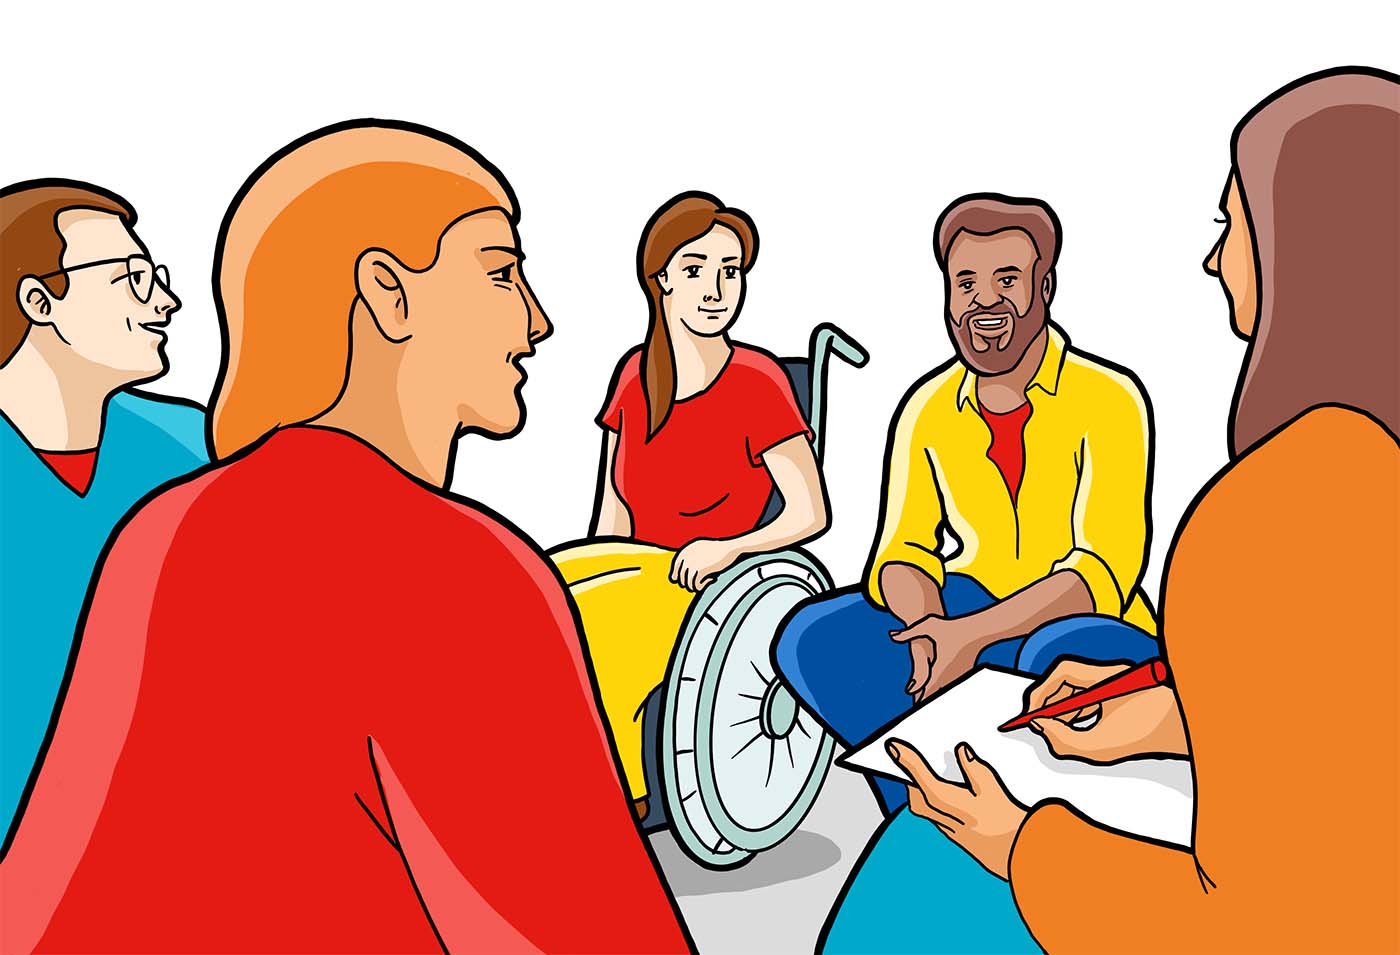 An illustration of 5 people with colorful clothes in a discussion group. One person is sitting in a wheelchair. One person is wearing a headscarf and holding a piece of paper and pen to take notes.